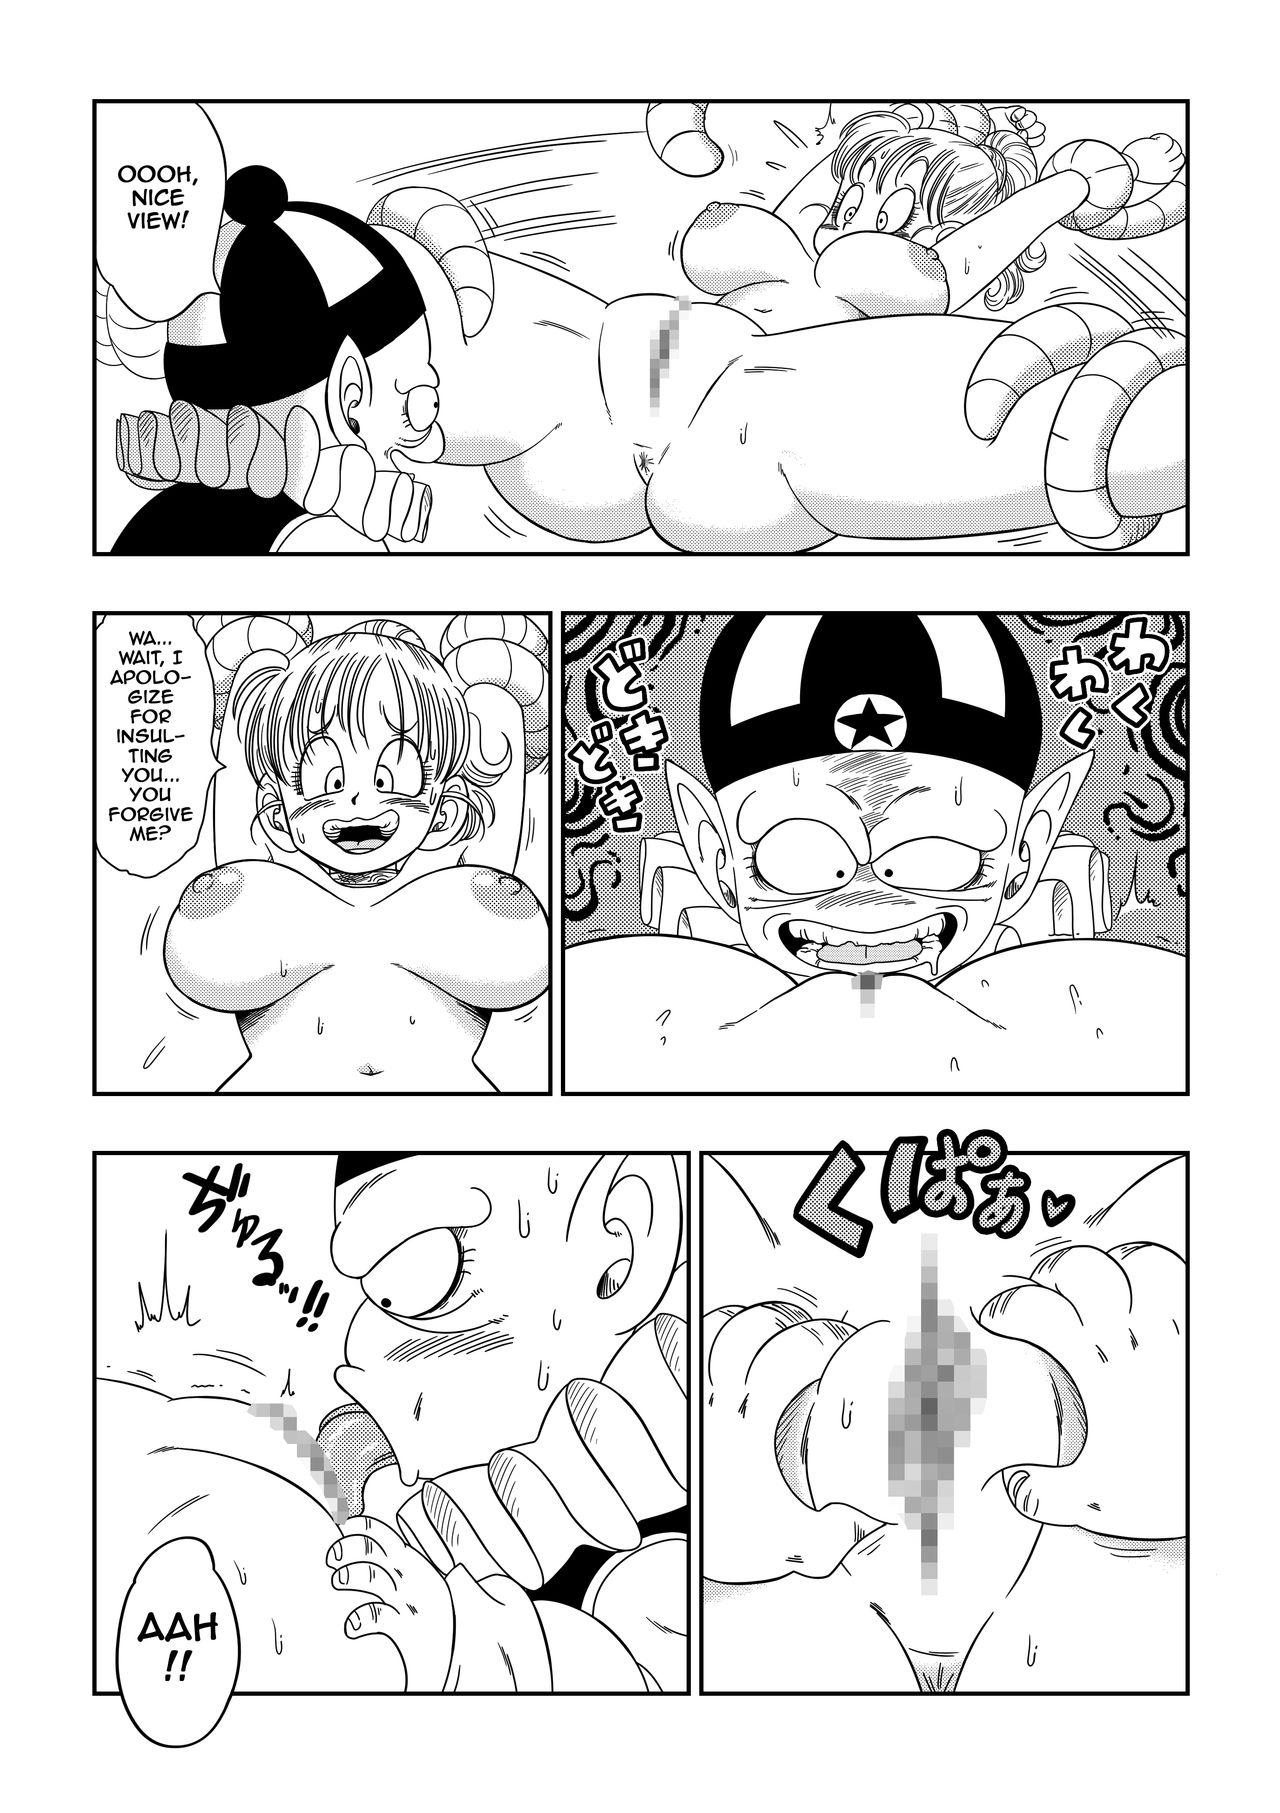 Coeds Dagon Ball - Punishment in Pilaf's Castle - Dragon ball Nasty Free Porn - Page 6